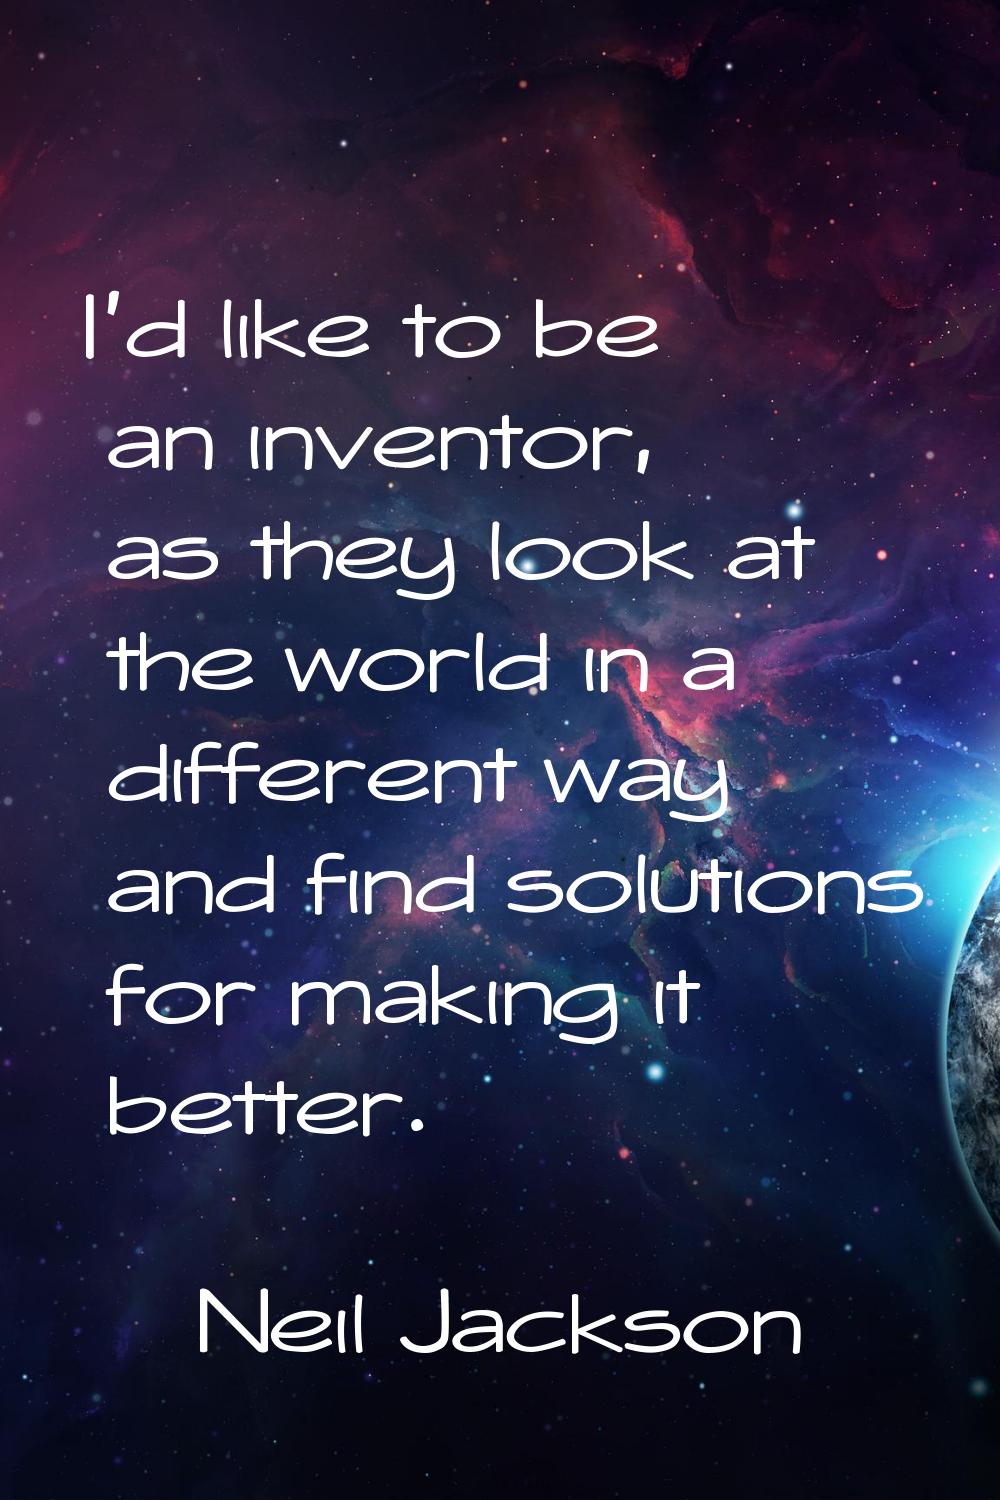 I'd like to be an inventor, as they look at the world in a different way and find solutions for mak